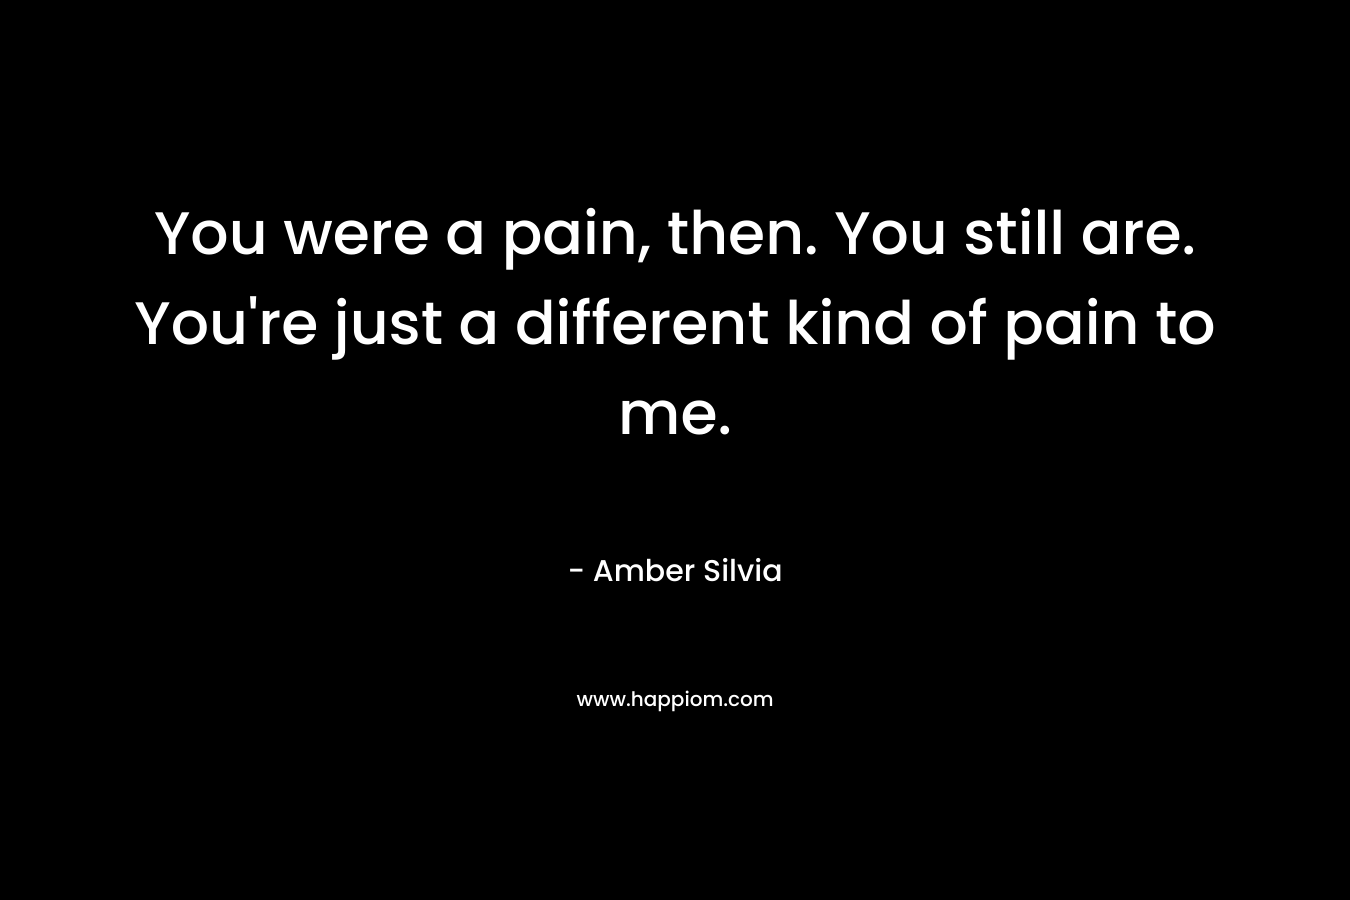 You were a pain, then. You still are. You’re just a different kind of pain to me. – Amber Silvia